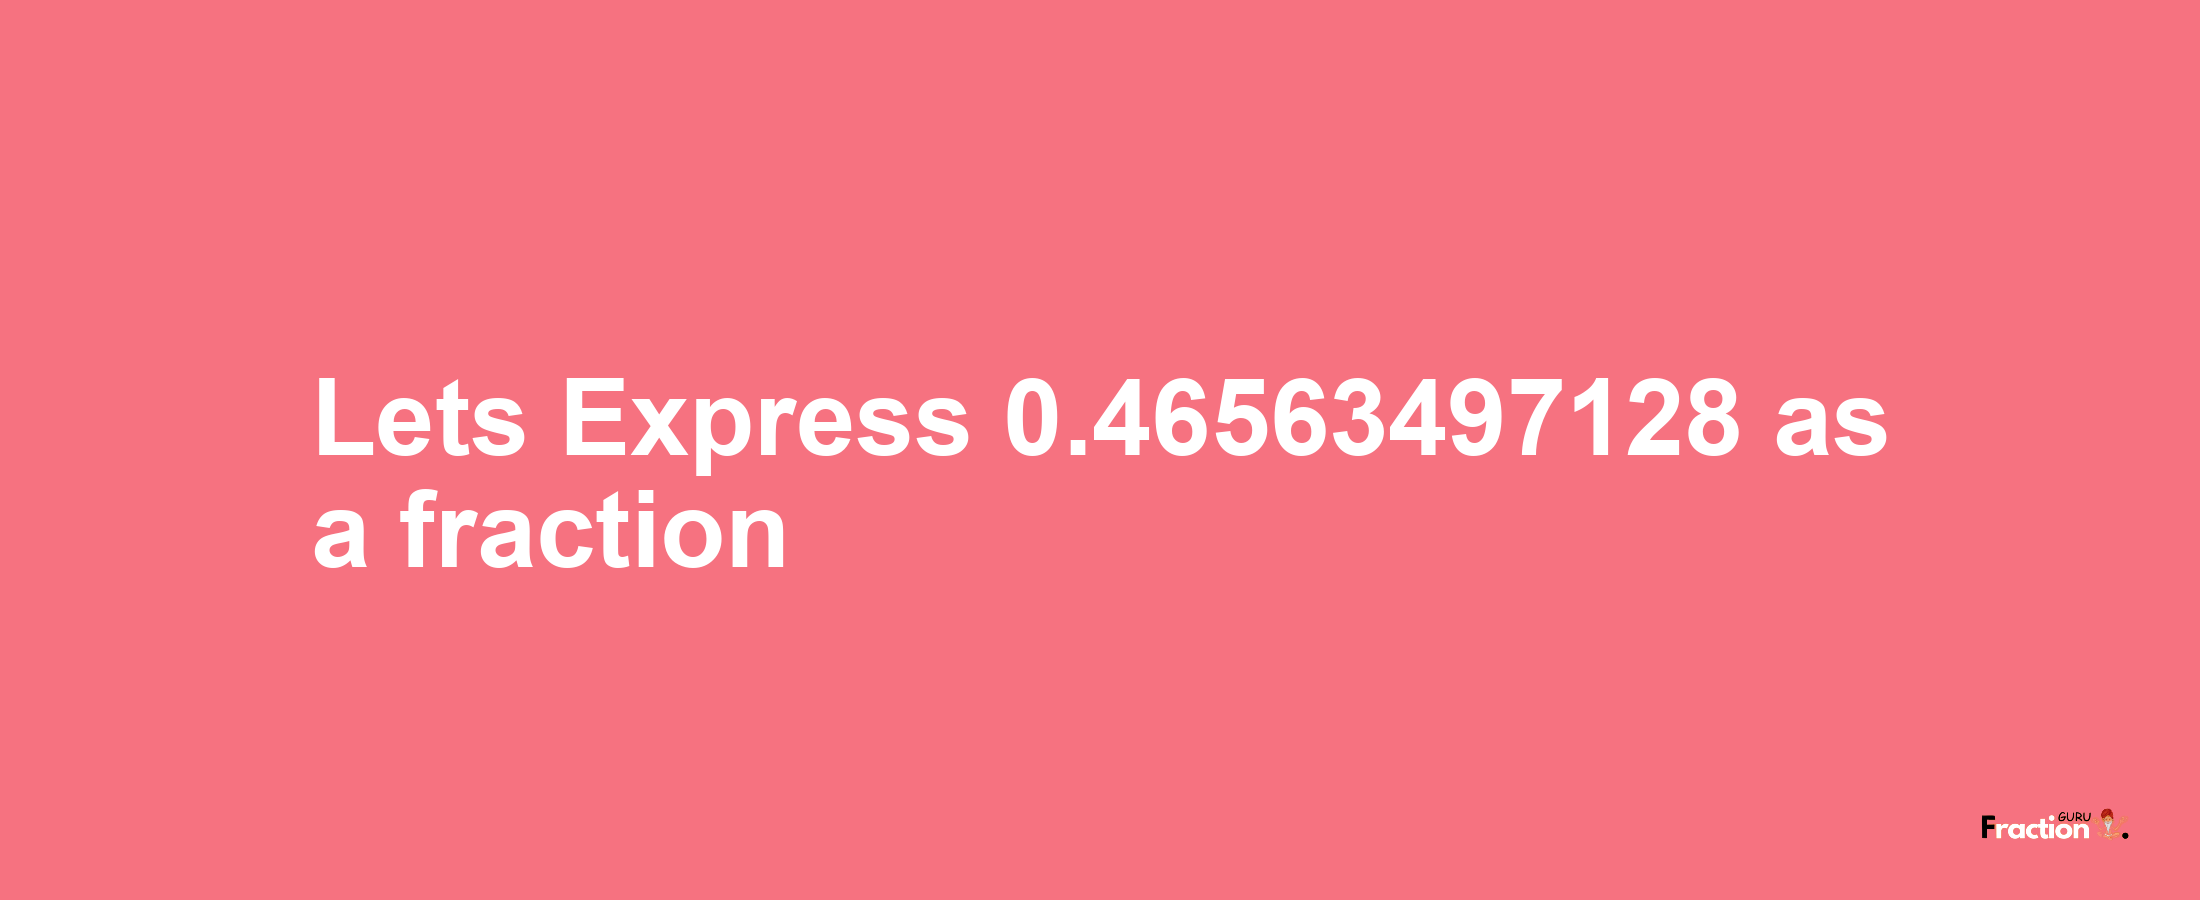 Lets Express 0.46563497128 as afraction